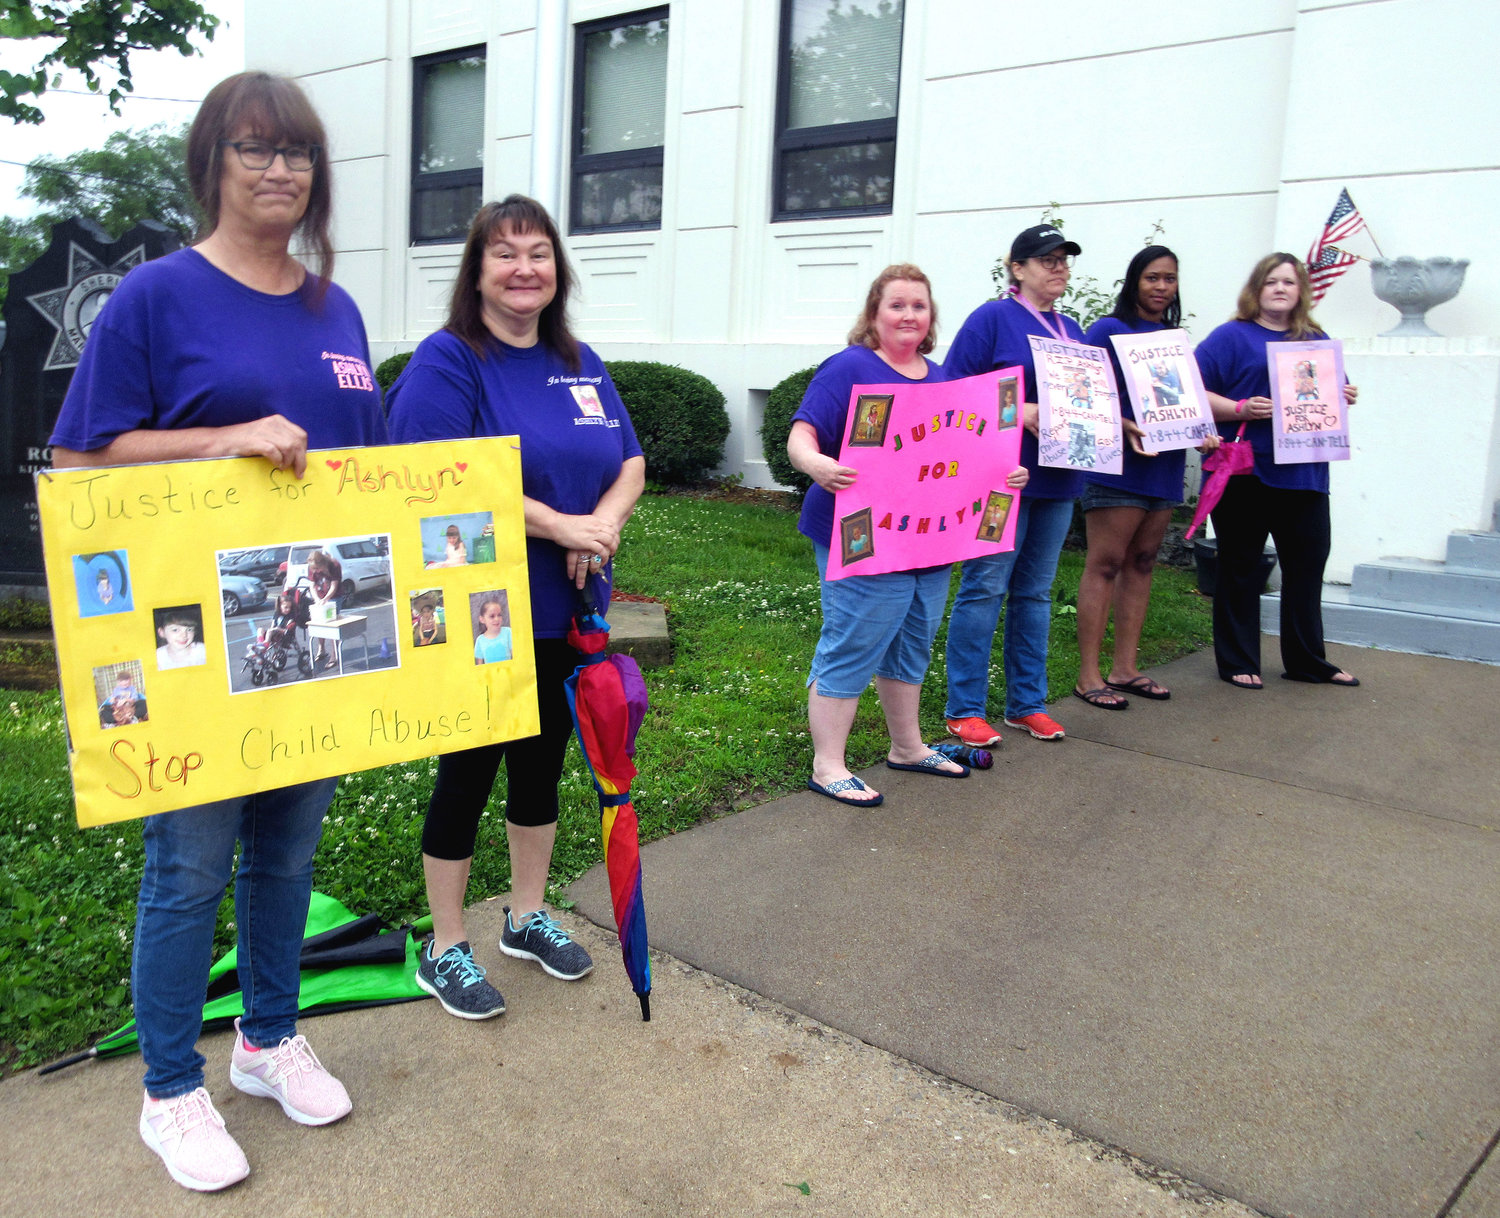 A group of Ashlyn’s teachers (above) from B.W. Robinson School in Rolla expressed their support for their former student outside of the courthouse. Their signs said Justice for Ashlyn and Stop Child Abuse.